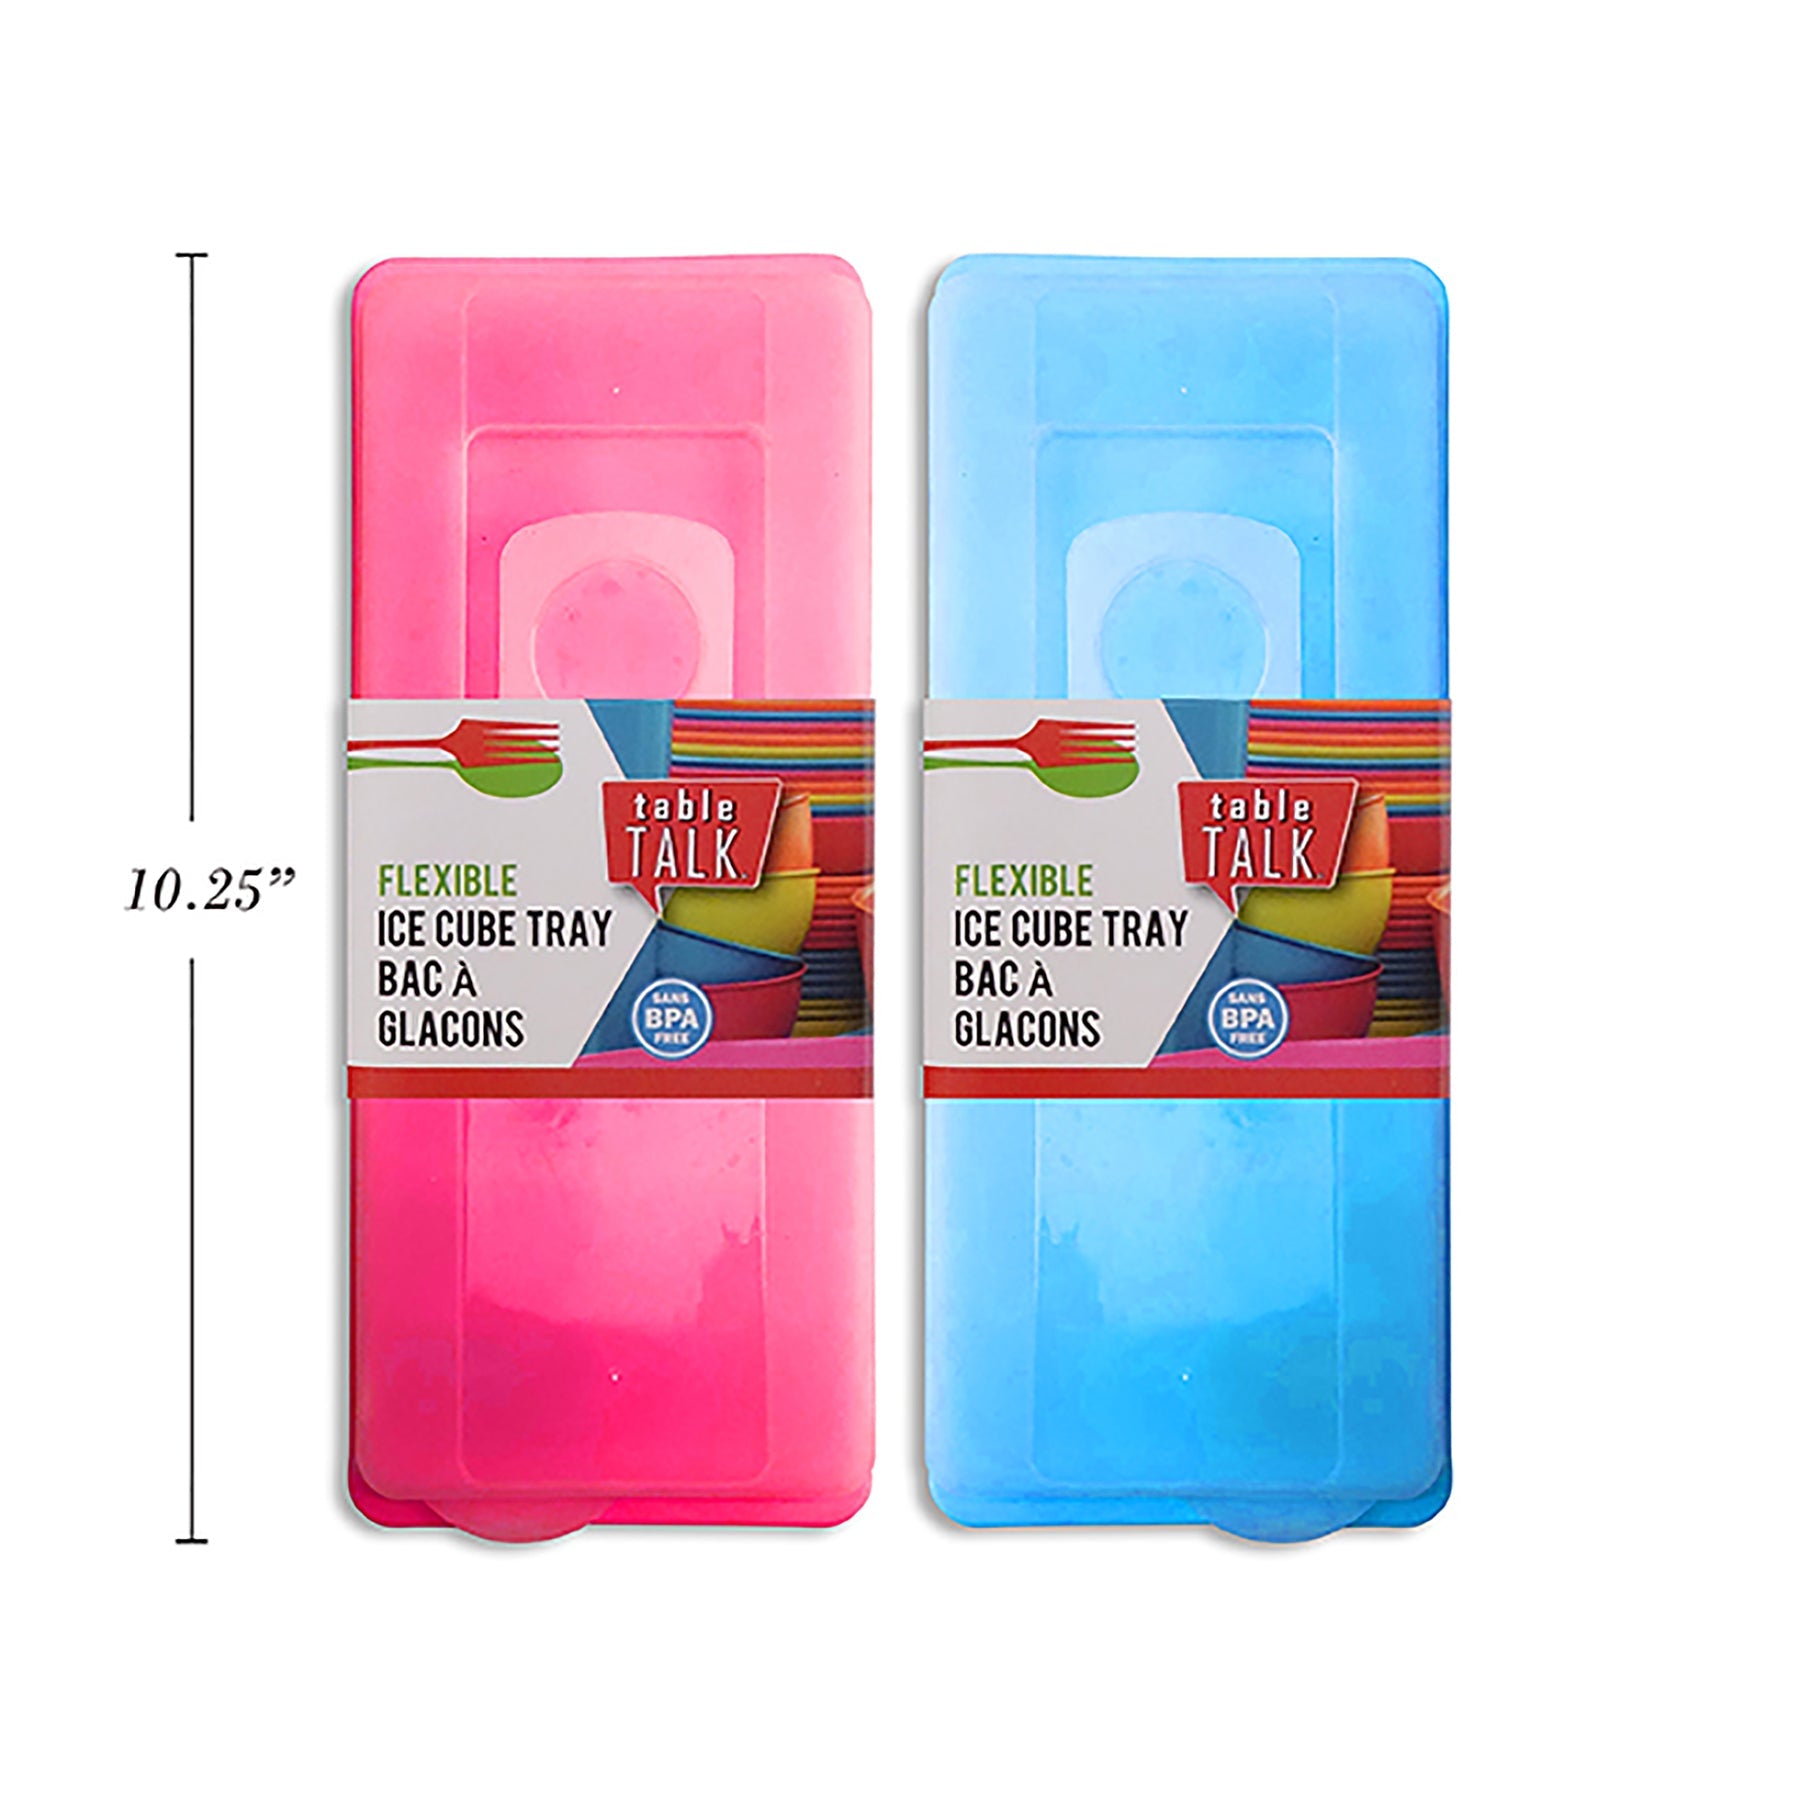 BBQ Flexible Ice Cube Tray 10.25in